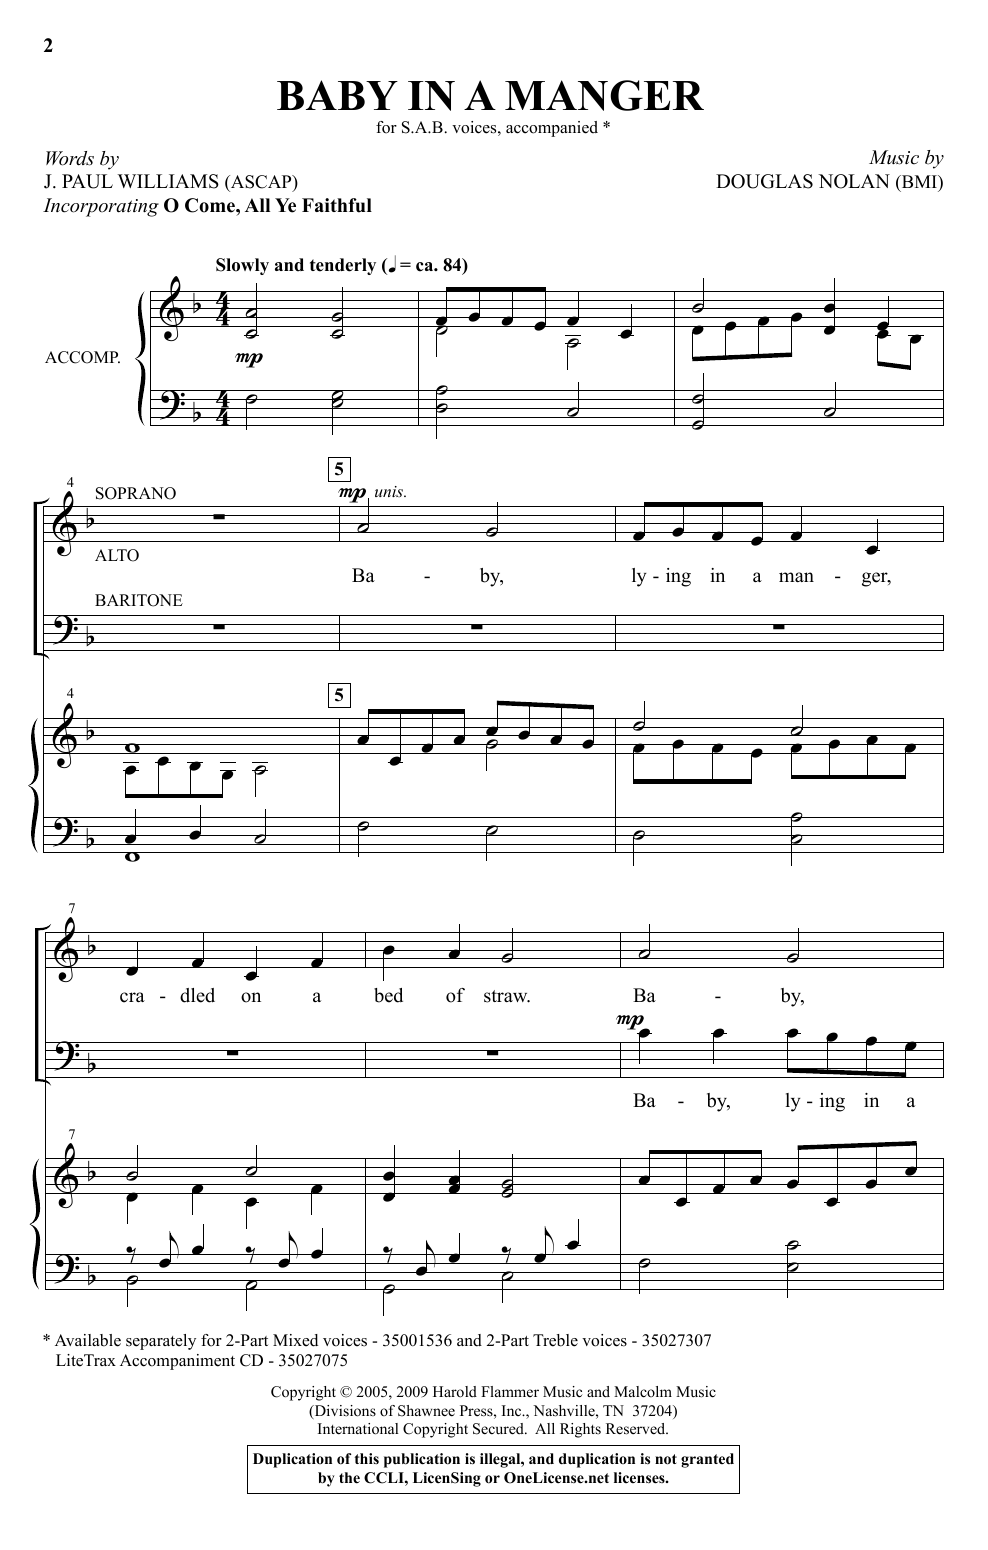 Download J. Paul Williams and Douglas Nolan Baby In A Manger Sheet Music